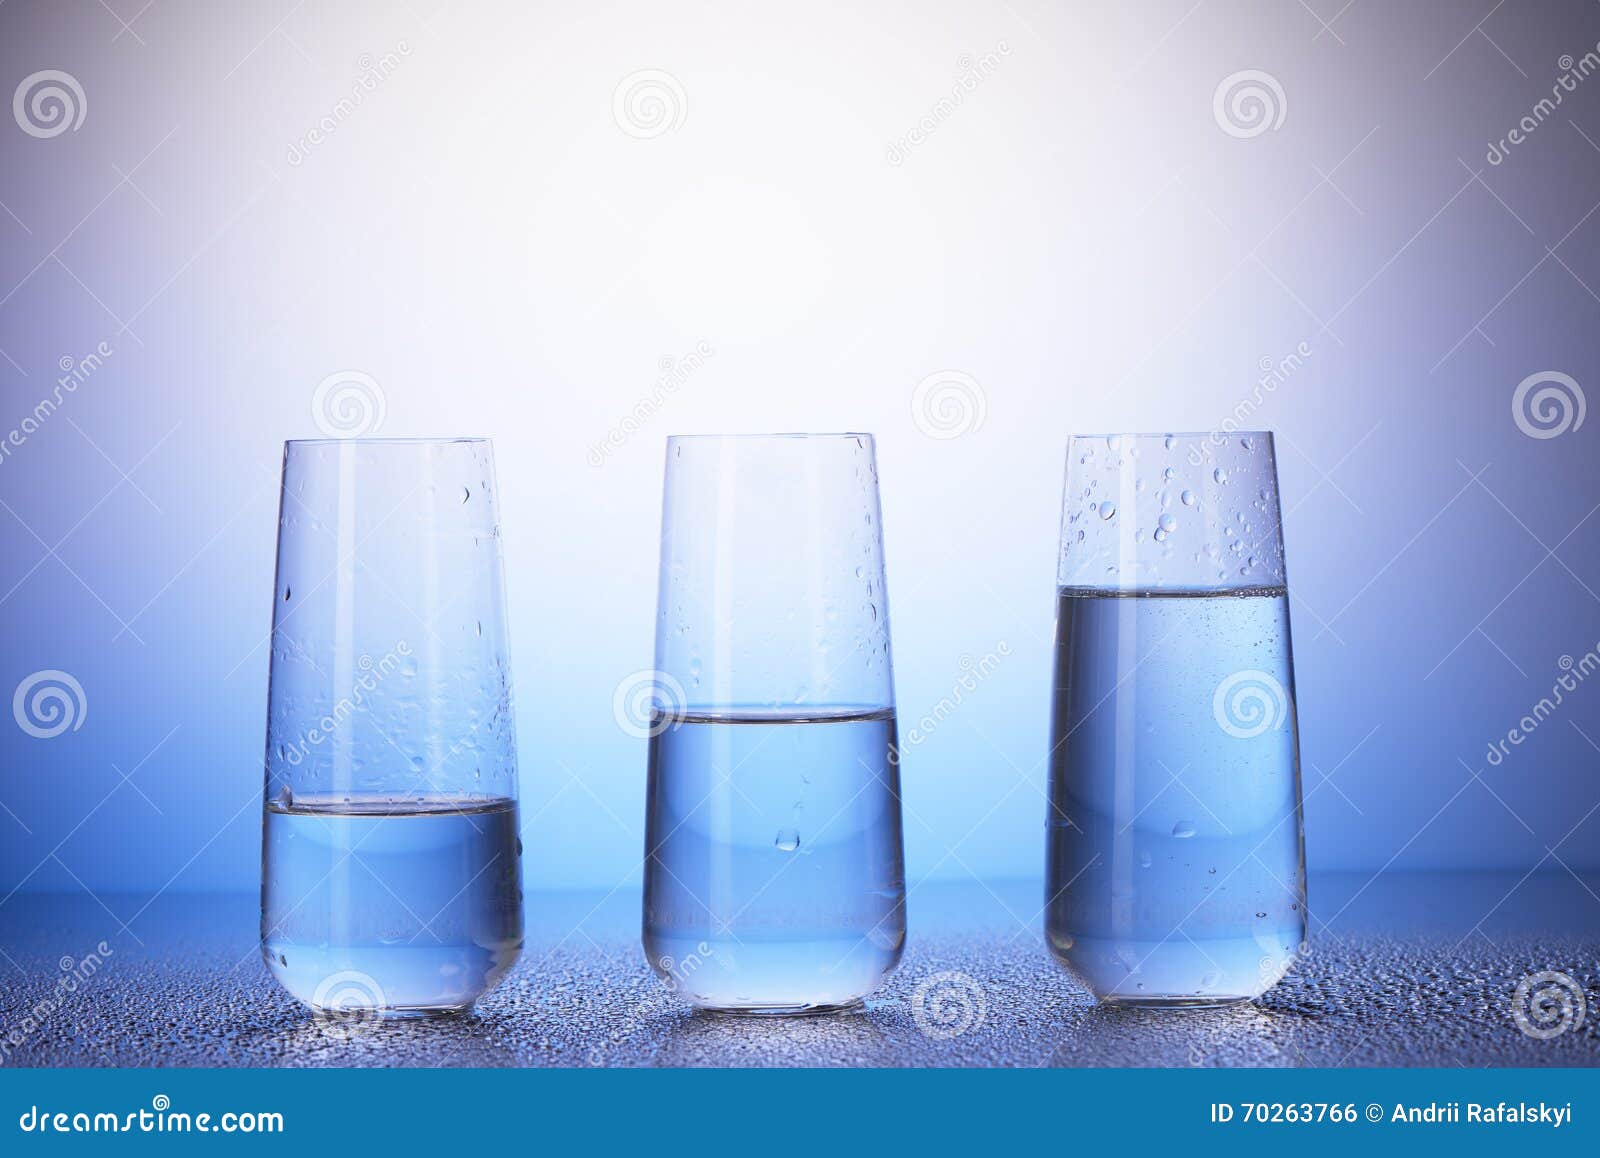 one-third, half-filled and two-thirds full drinking glasses